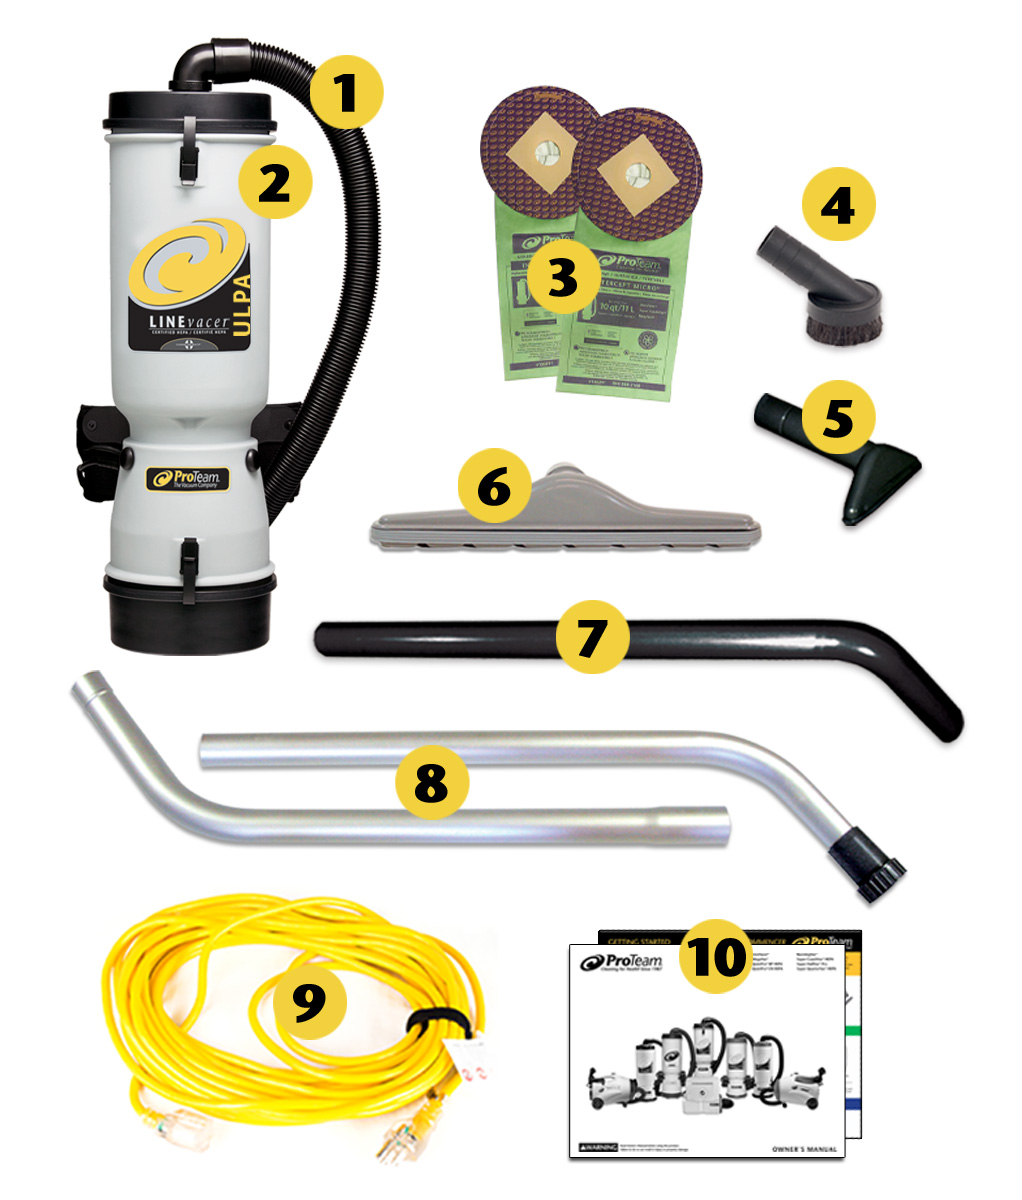 Image of what is included in the box of ProTeam LineVacer ULPA 10 qt. Backpack Vacuum